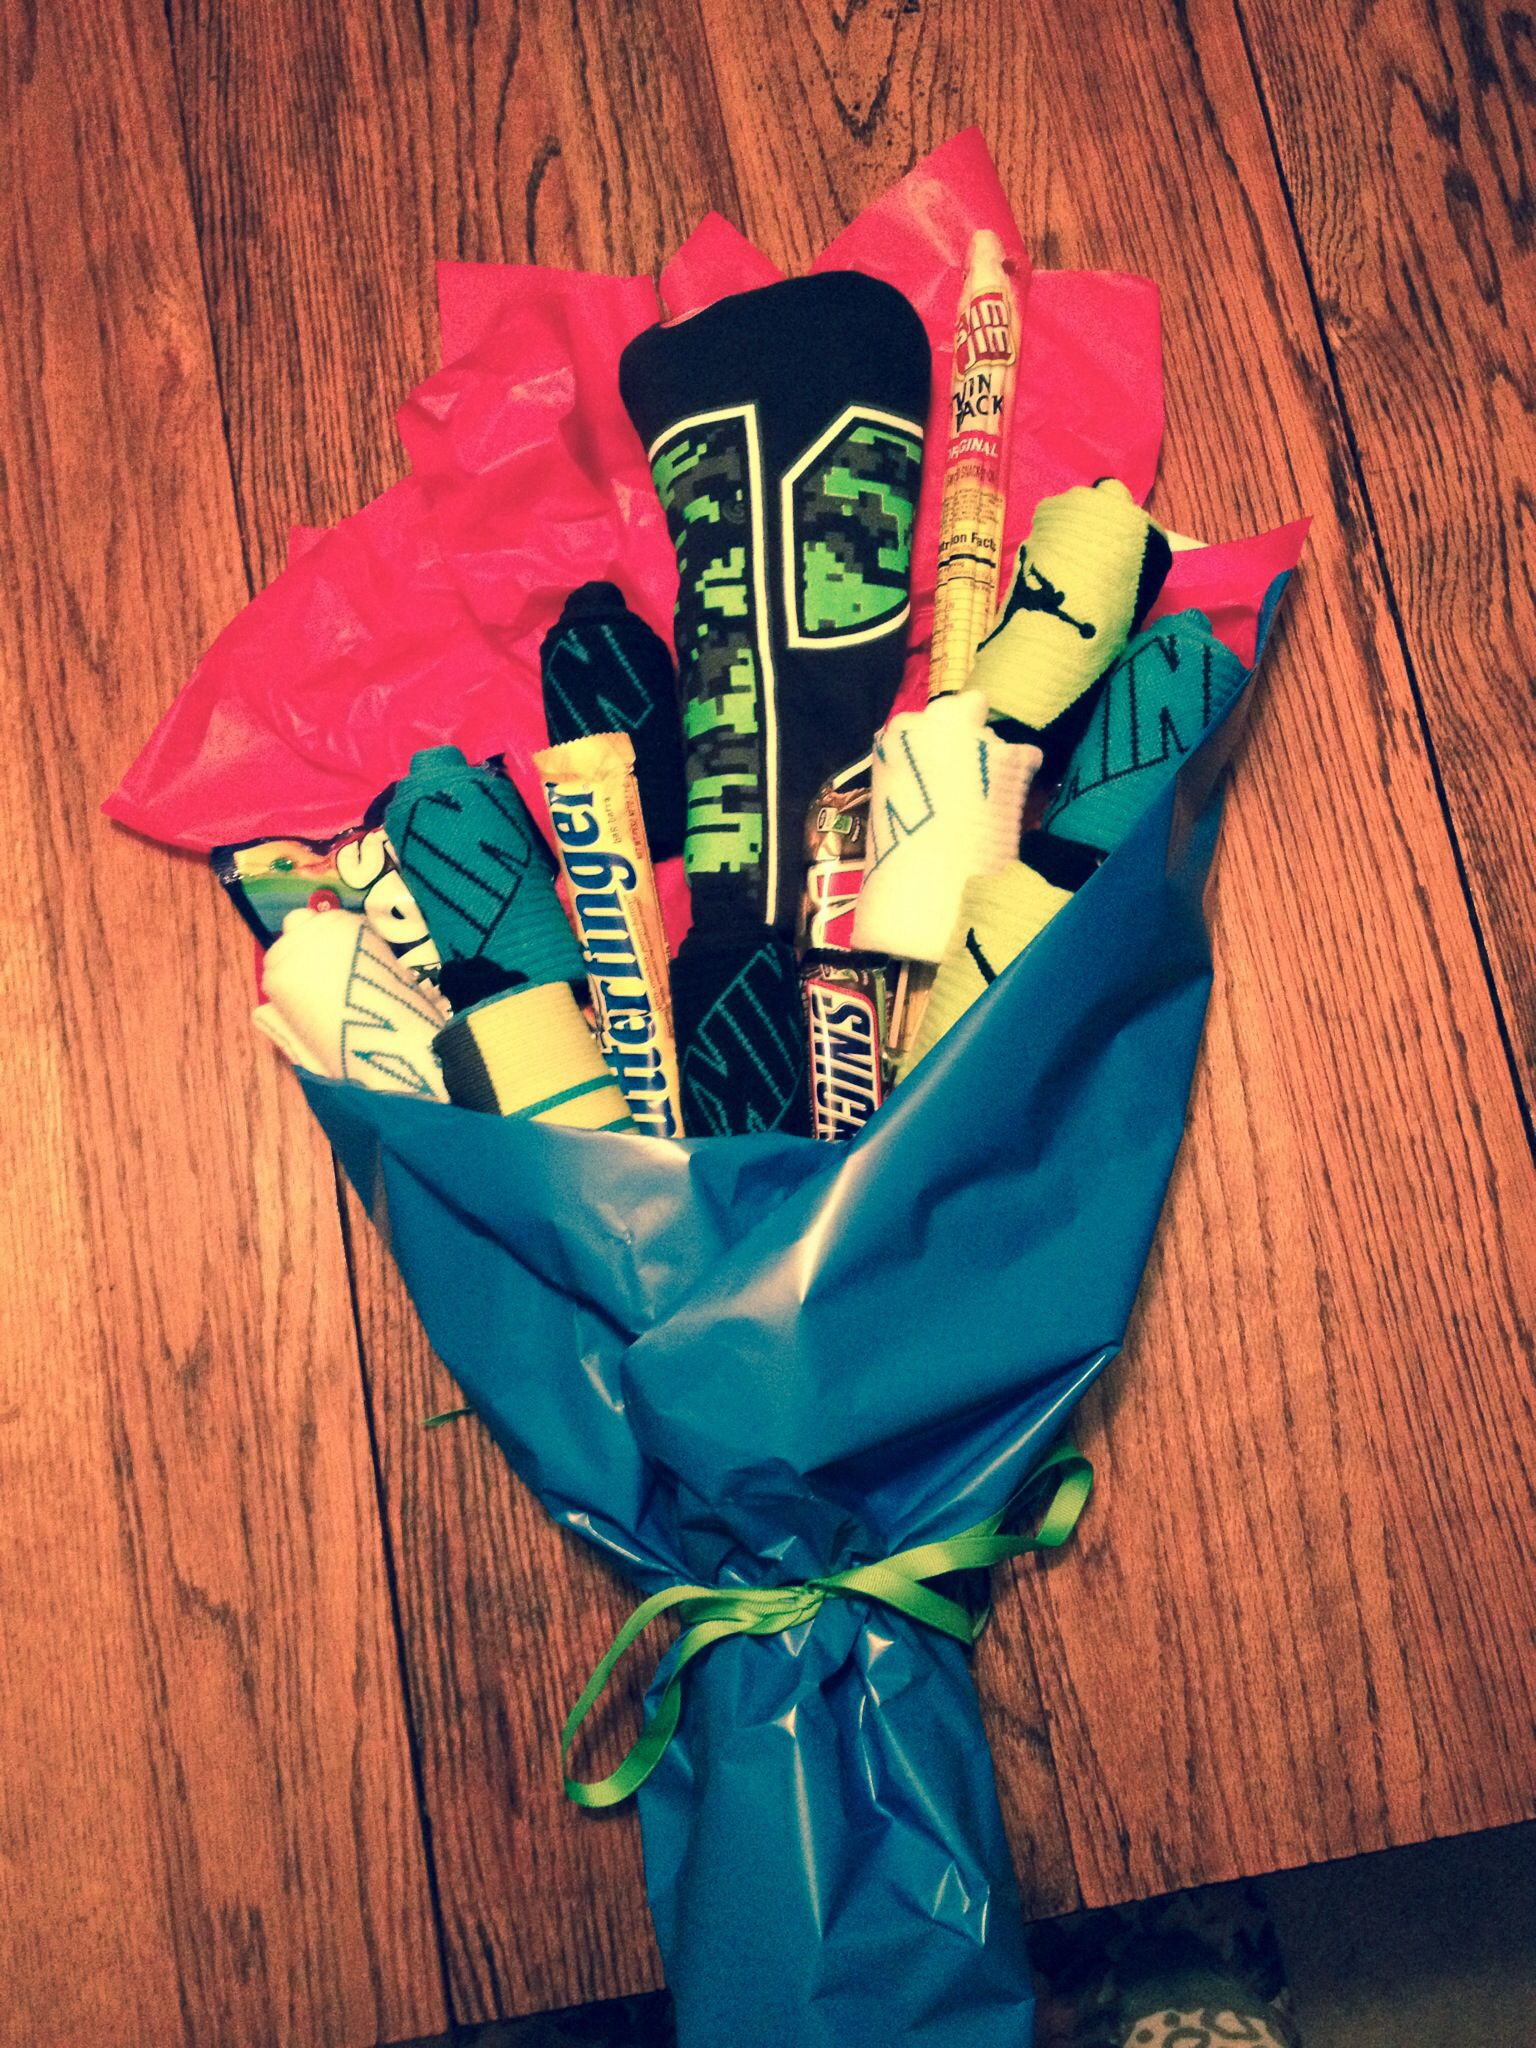 Boy Valentines Gift Ideas
 Nike elite socks bouquet for my 12 year old with treats